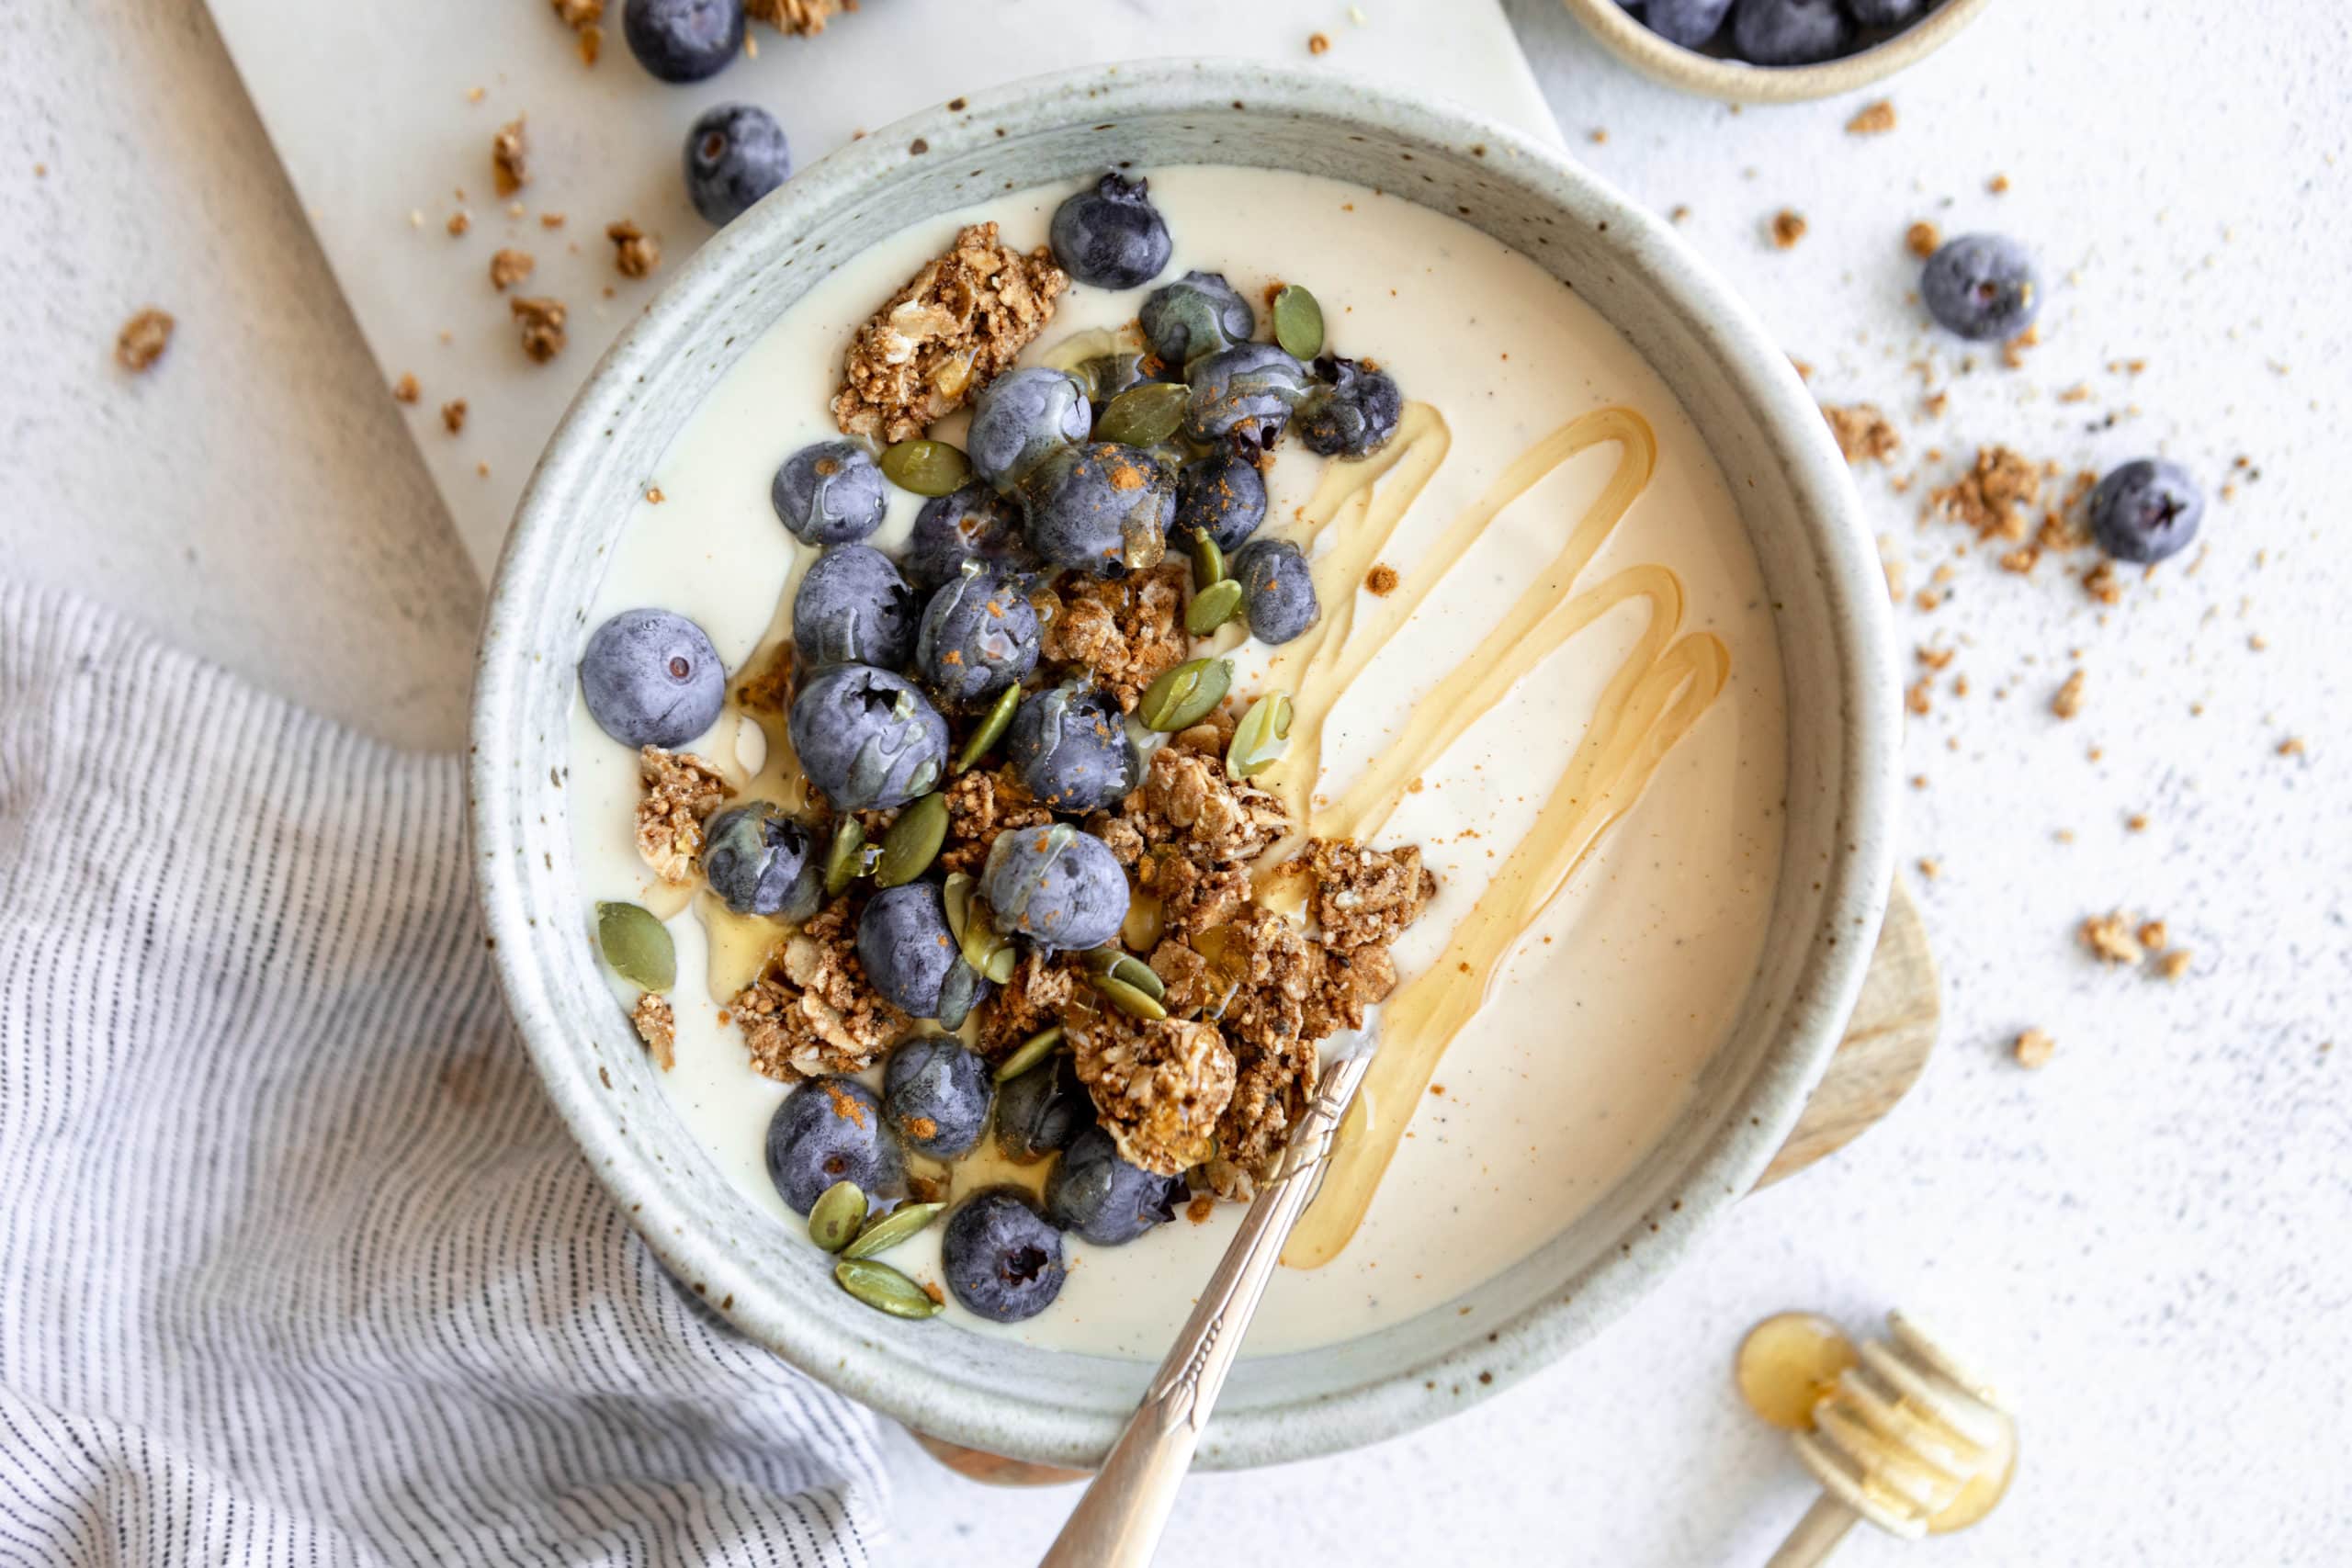 coconut yogurt in a white bowl topped with granola and fruit.